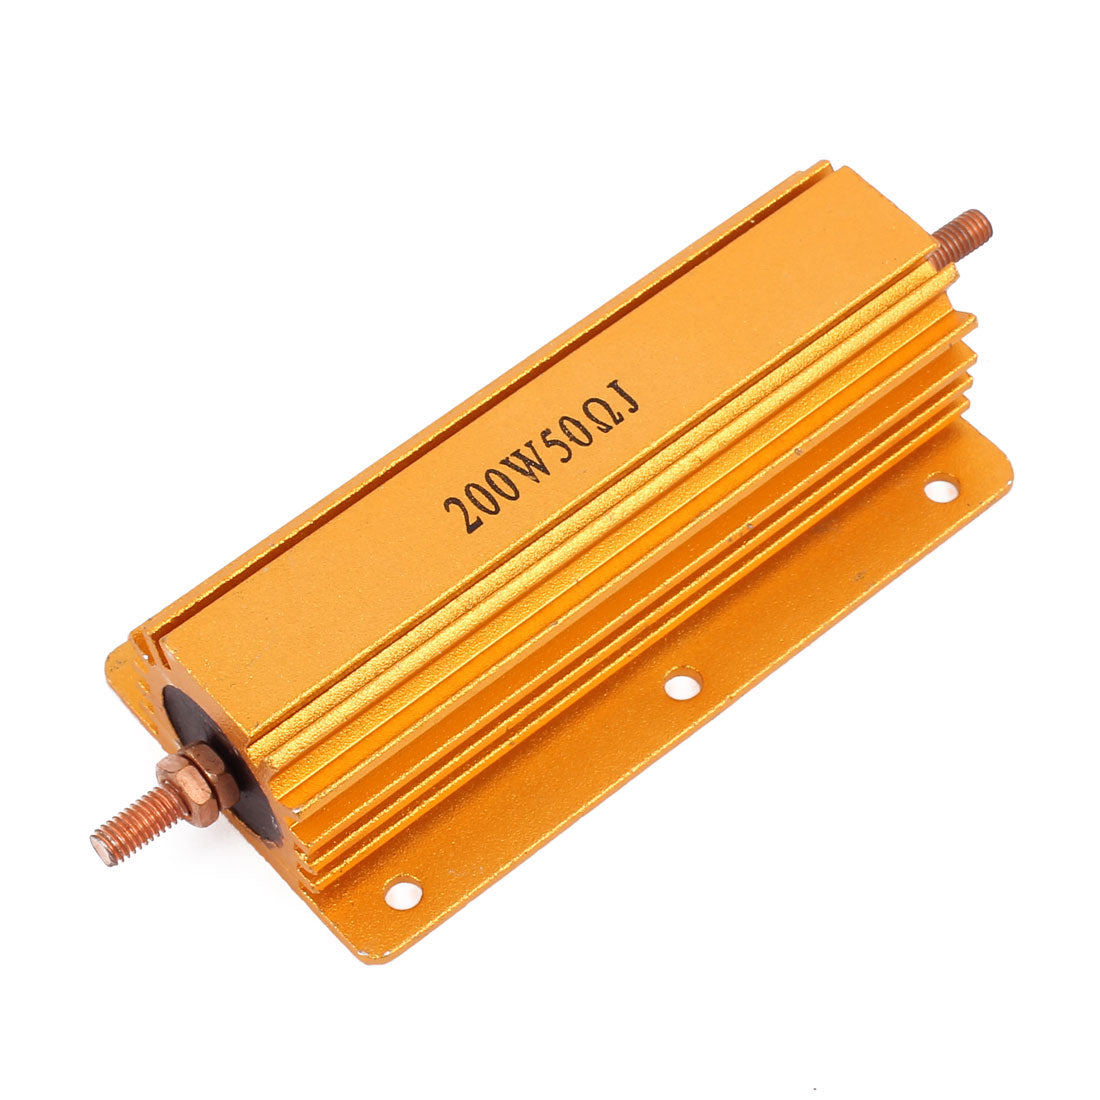 uxcell Uxcell 5% 200W 50 Ohm Wirewound Aluminum Housed Clad Resistor Gold Tone 12cm Long